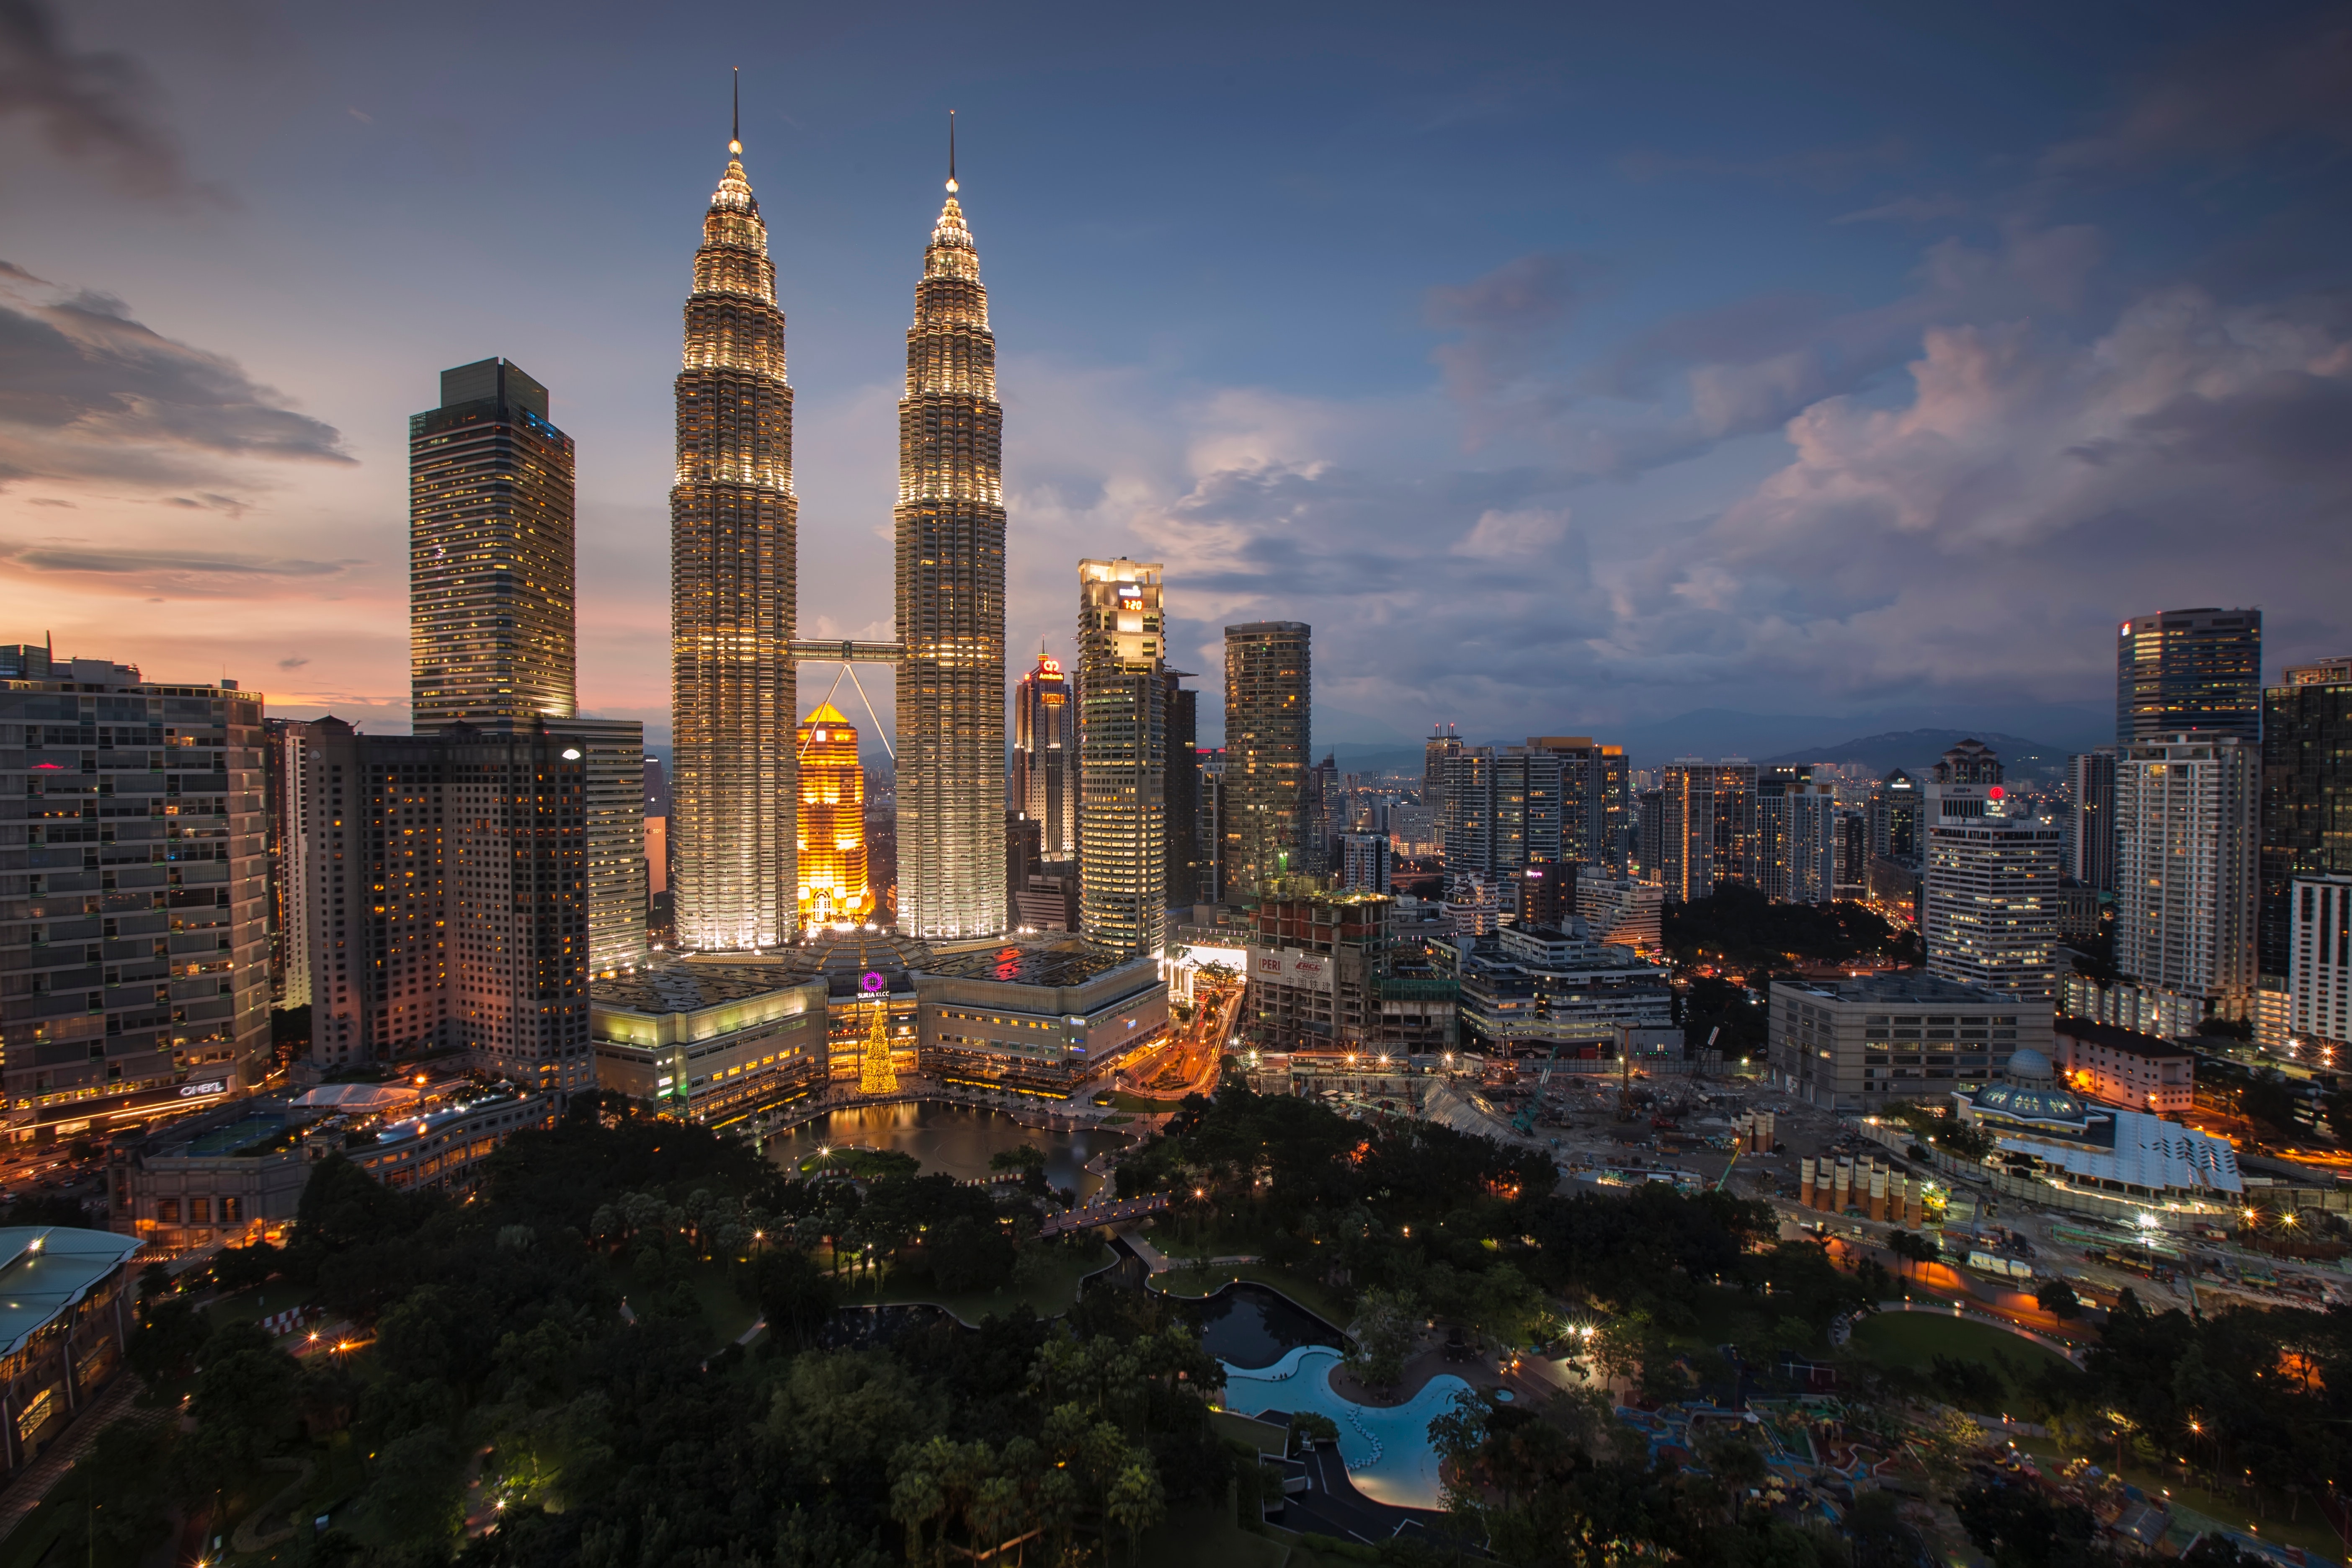 Malaysia photos download the best free malaysia stock photos hd images